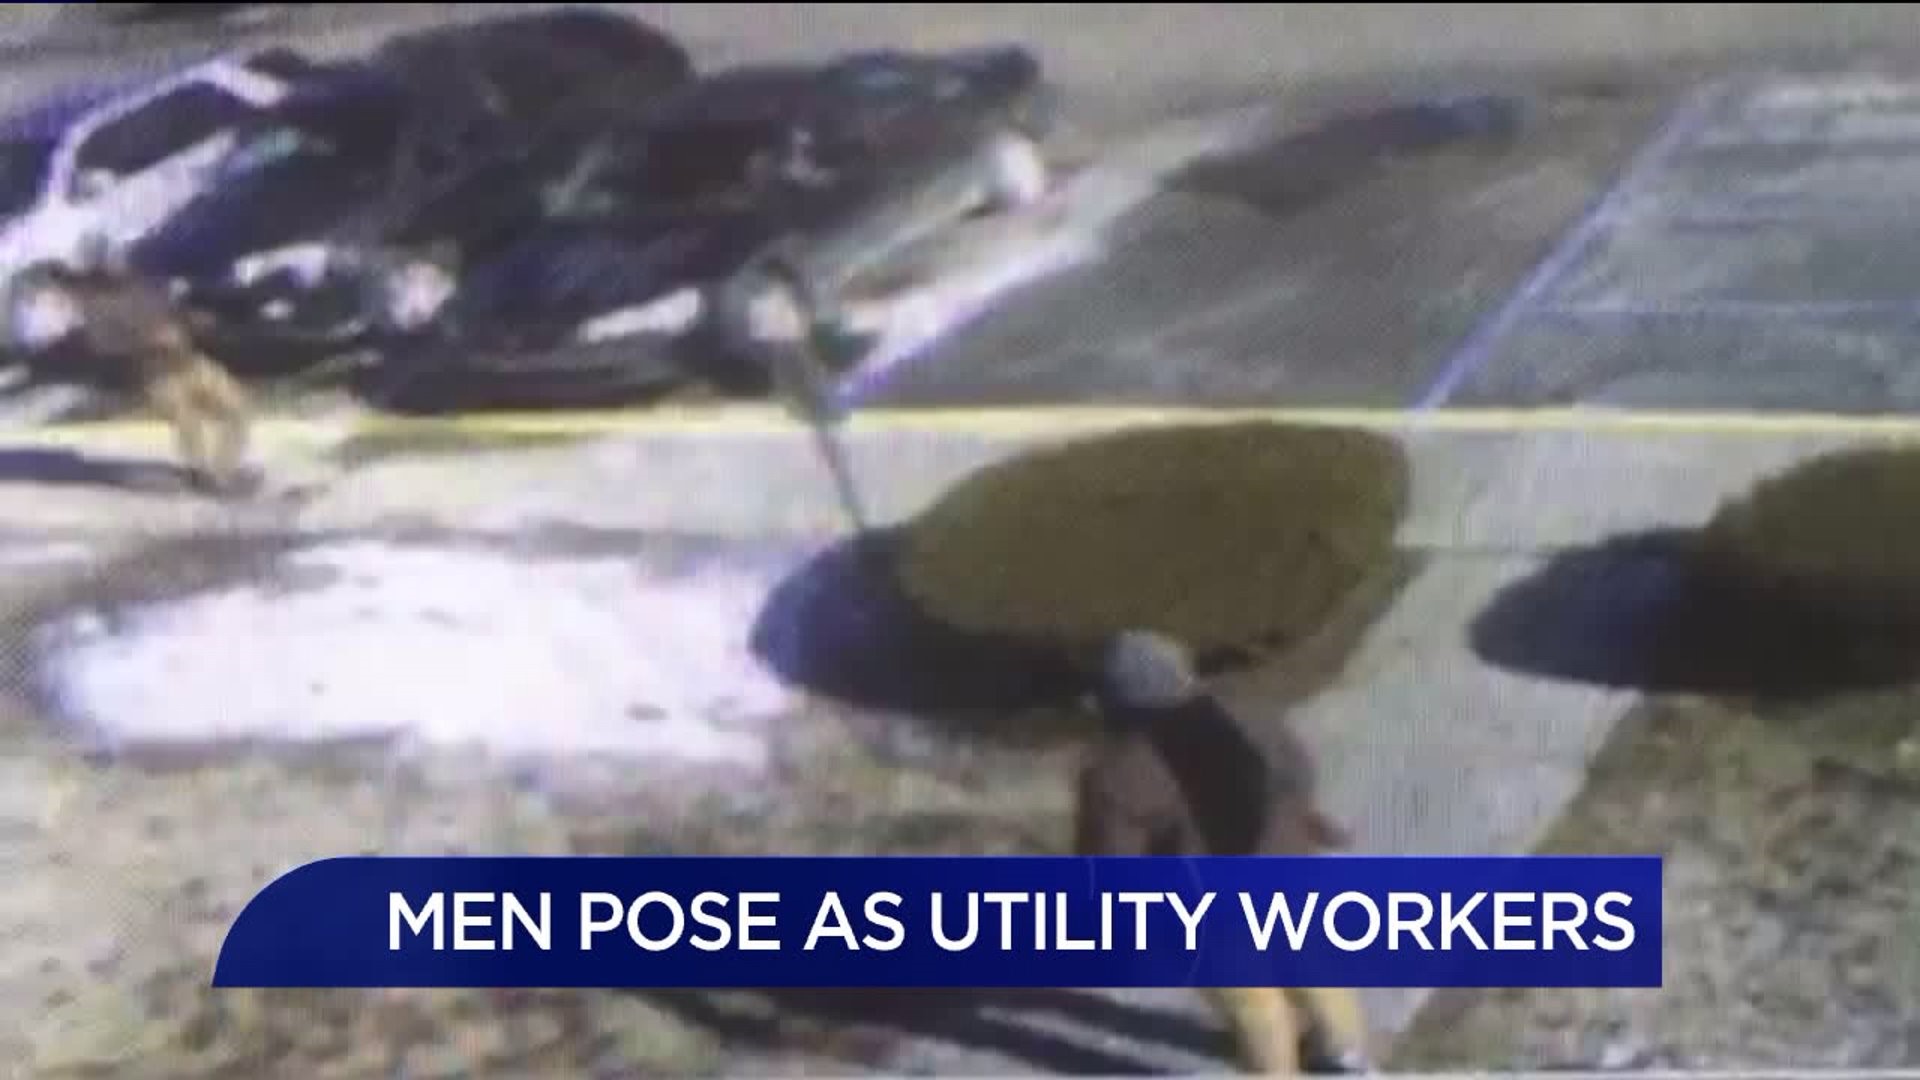 Police Searching for Two Men Posing as Utility Workers in Luzerne County